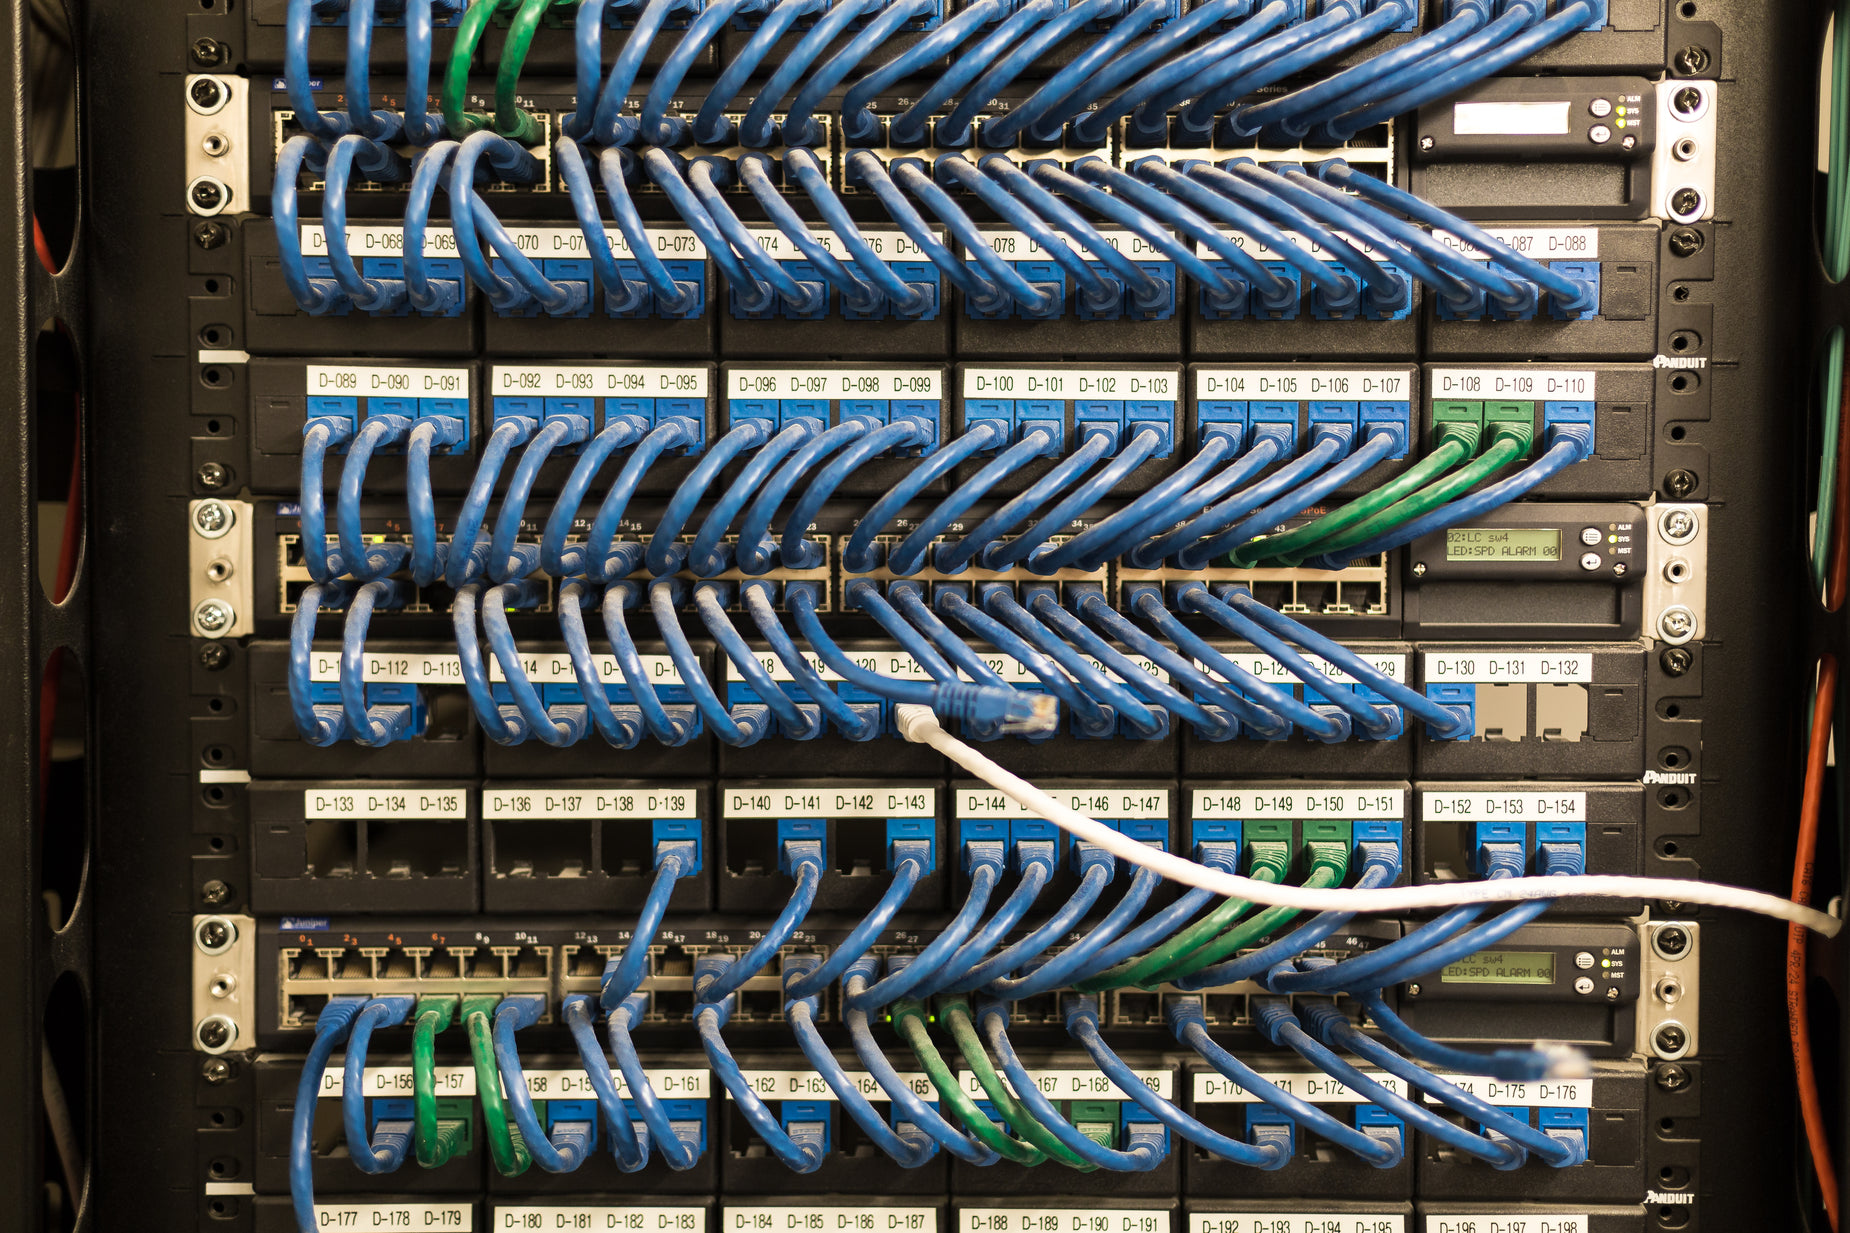 several servers are connected together with colorful cables